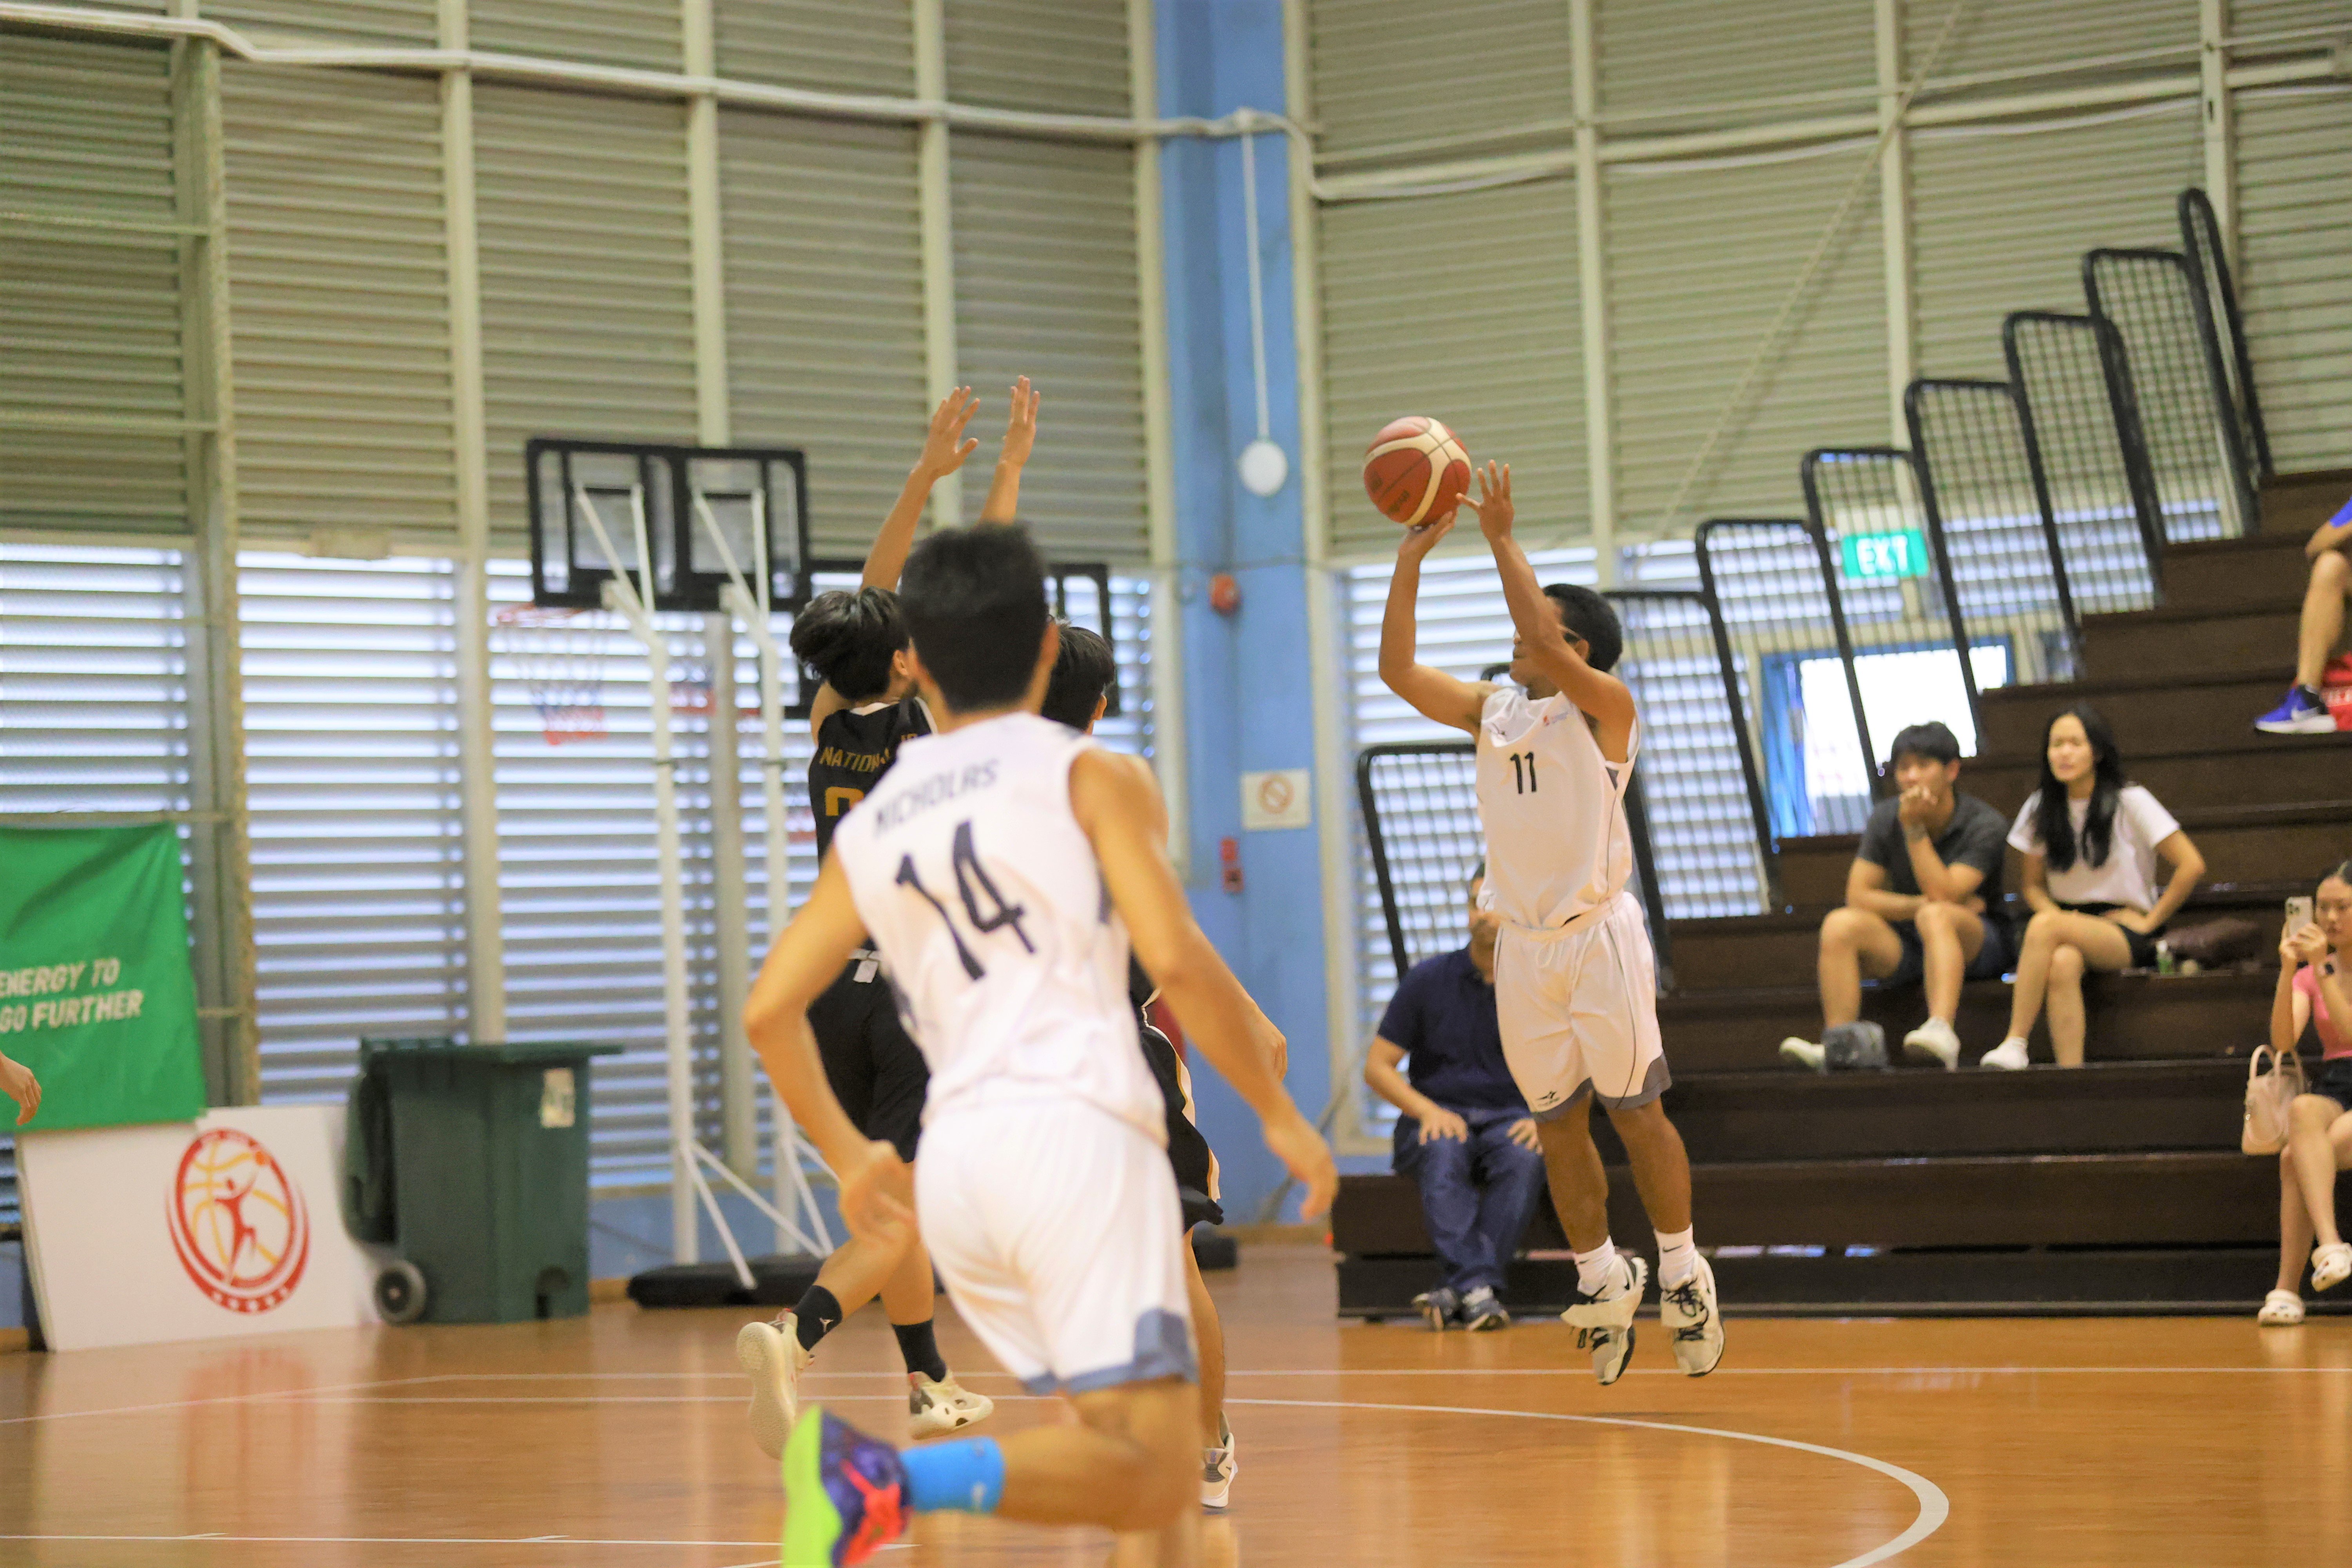 NSG 2023 Basketball : Defending Champions National JC, Defeat Millennia Institute en route to the Quarter-final Stage!